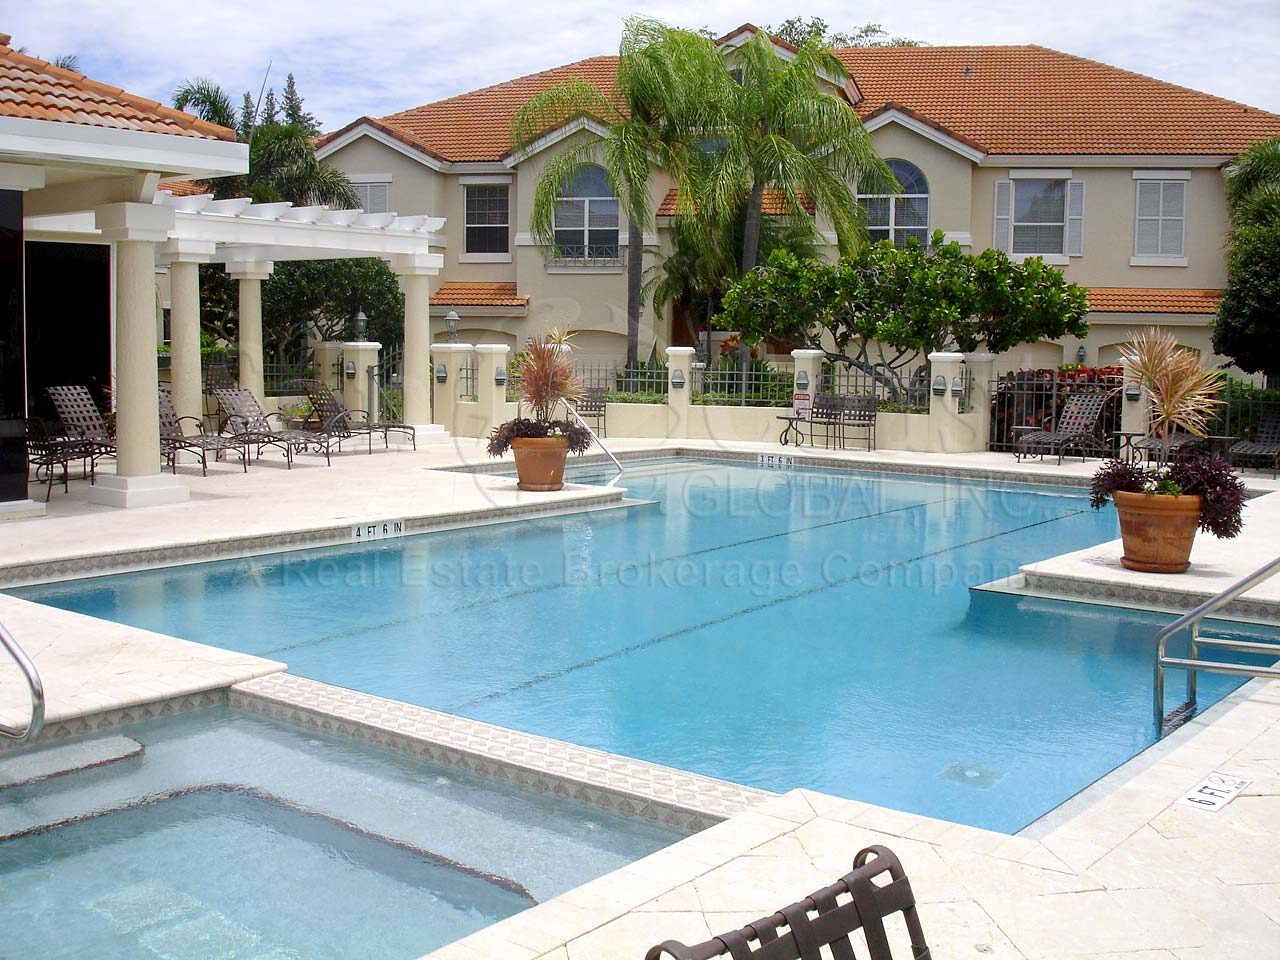 Colonade Community Pool and Hot Tub